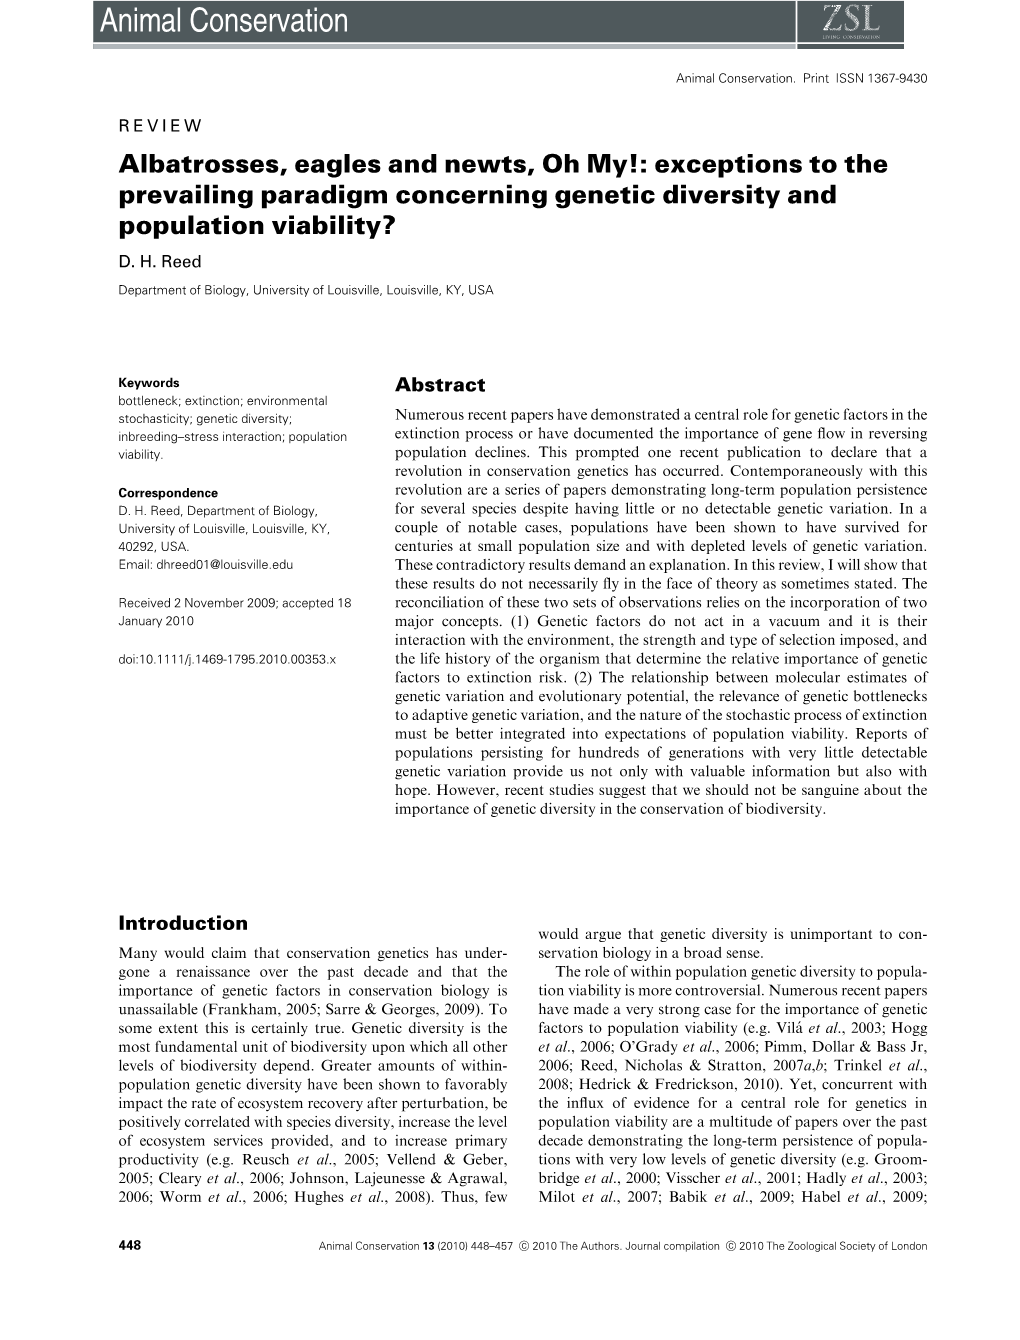 Albatrosses, Eagles and Newts, Oh My!: Exceptions to the Prevailing Paradigm Concerning Genetic Diversity and Population Viability? D